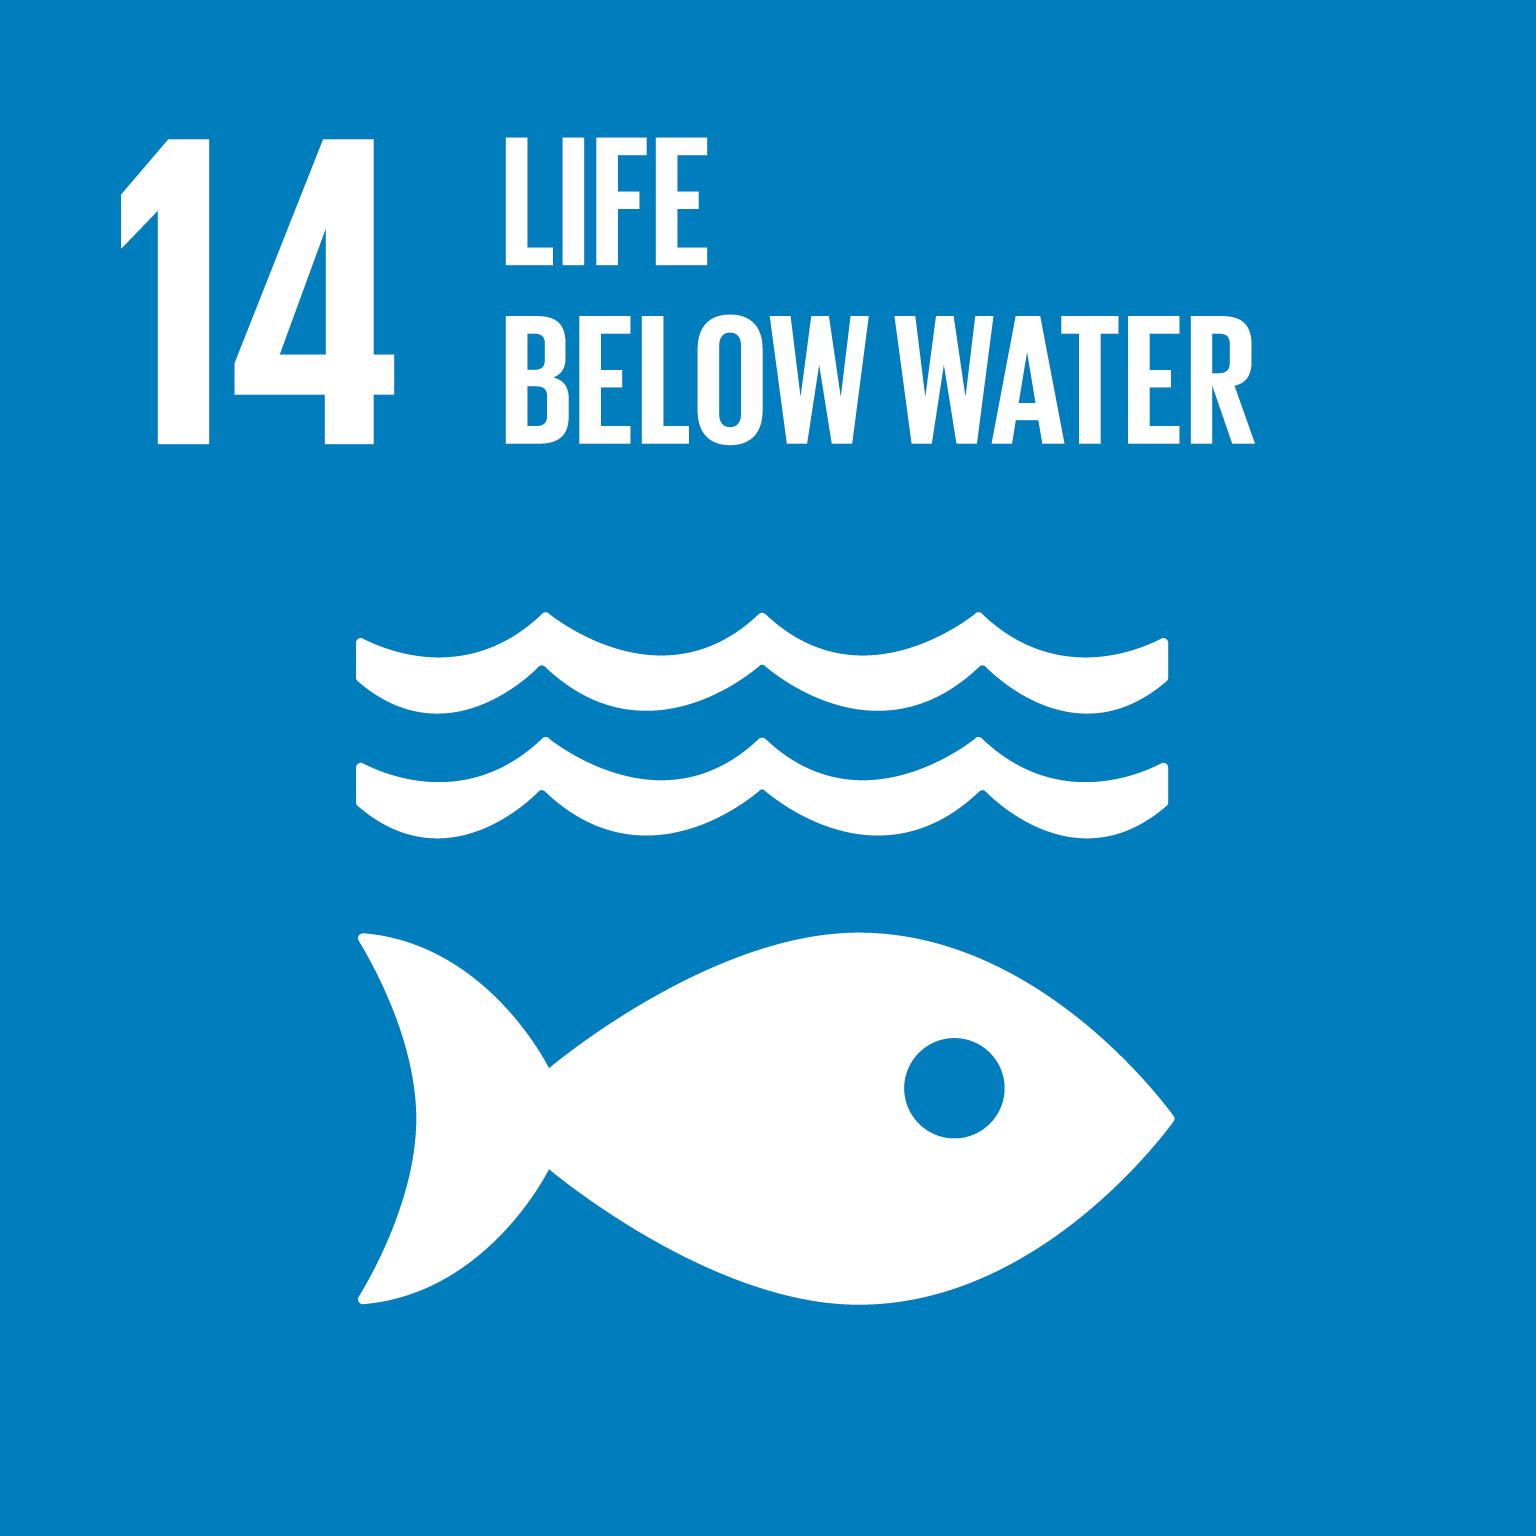 Goal 14: Life Below Water, the text of this infographic is listed below